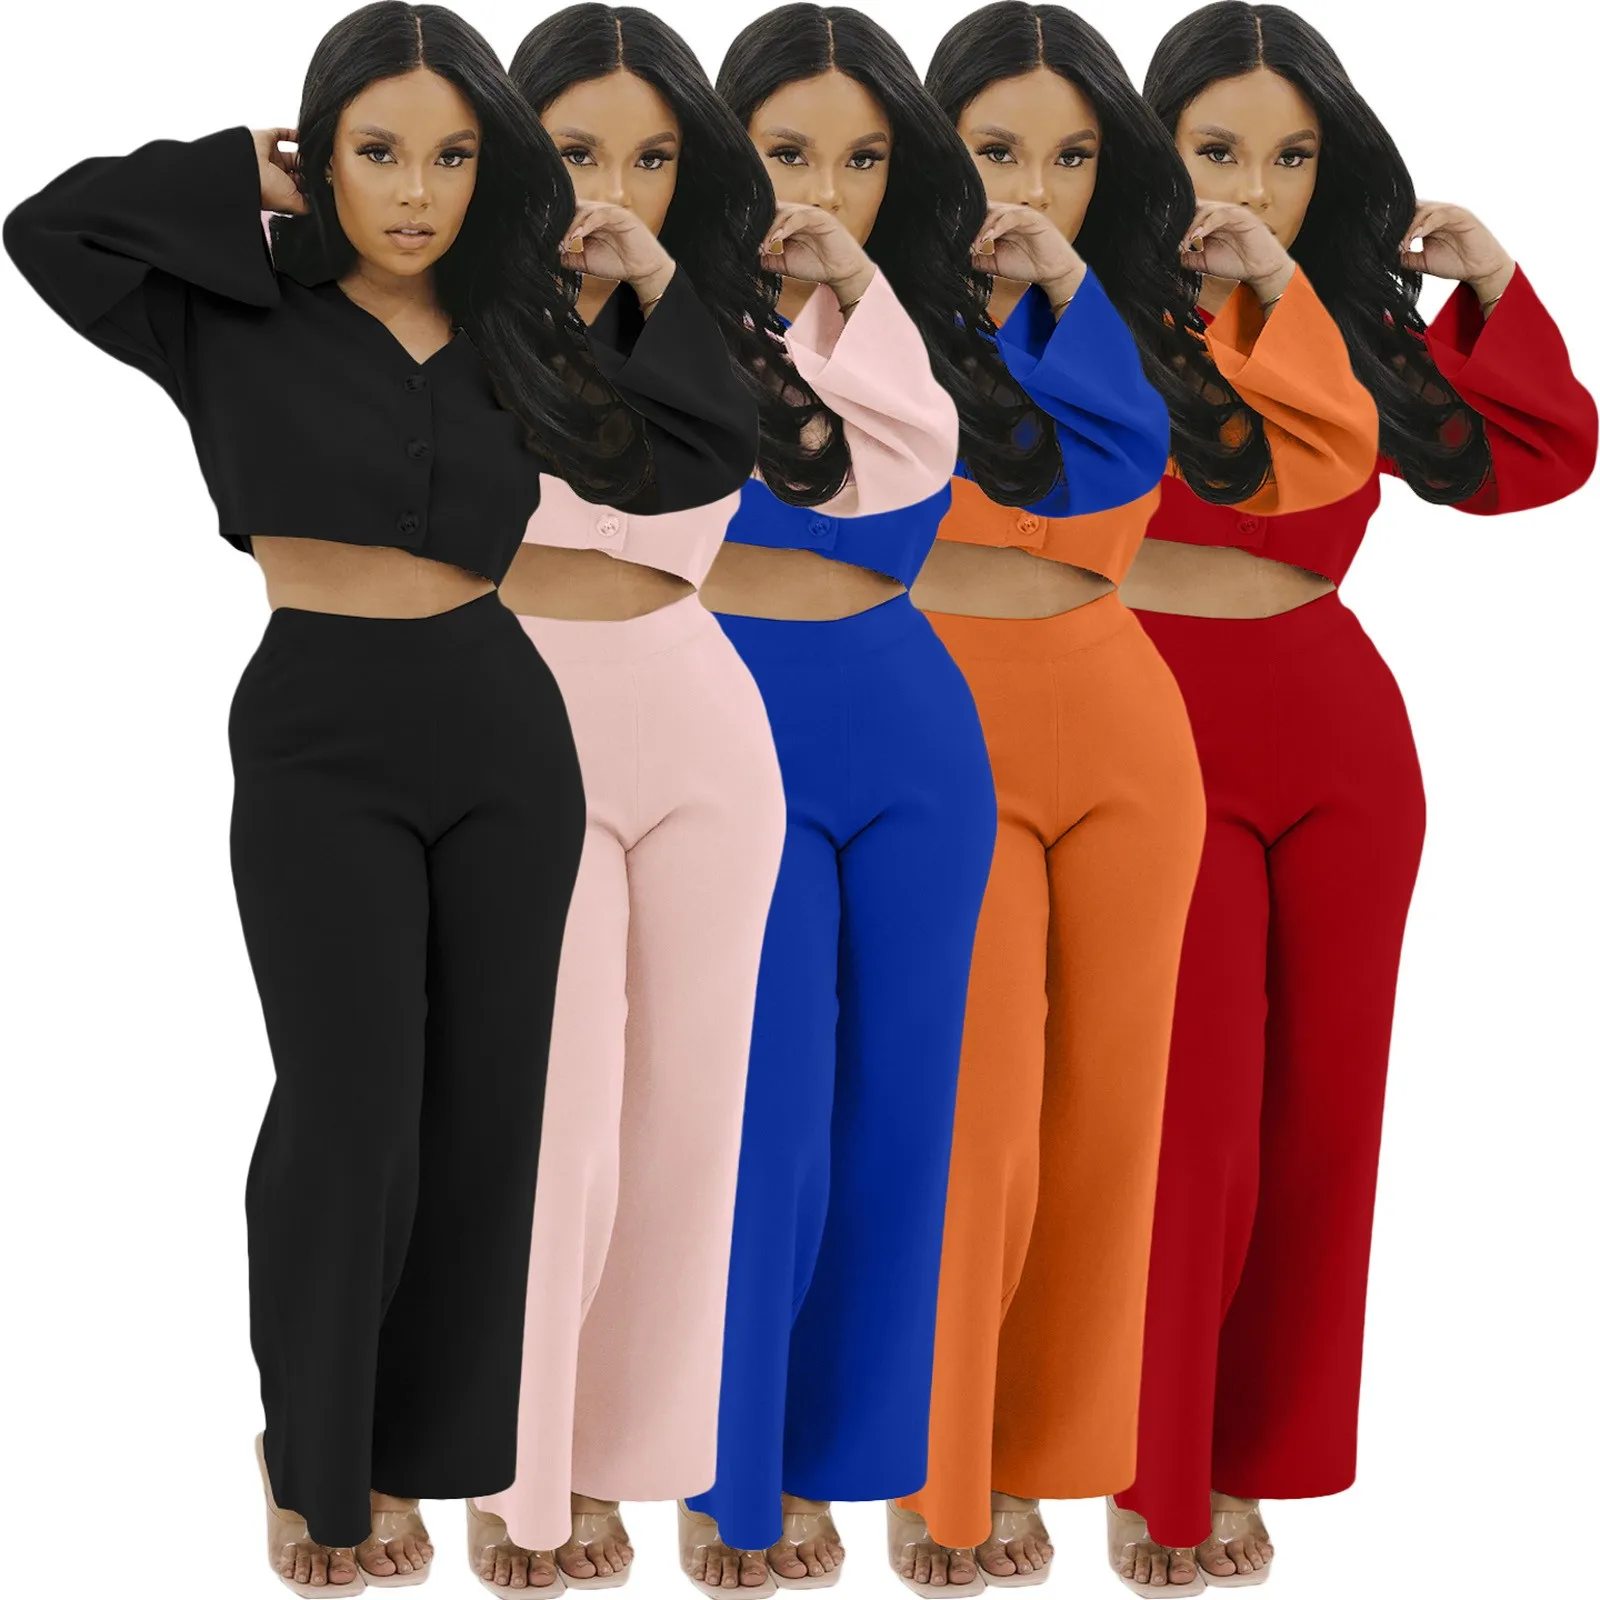 Sport Clothing Women Fashion Button Solid Color Sports Female Long Sleeve Casual Cotton Tracksuits Set 2 Piece Plus Size S-2XL